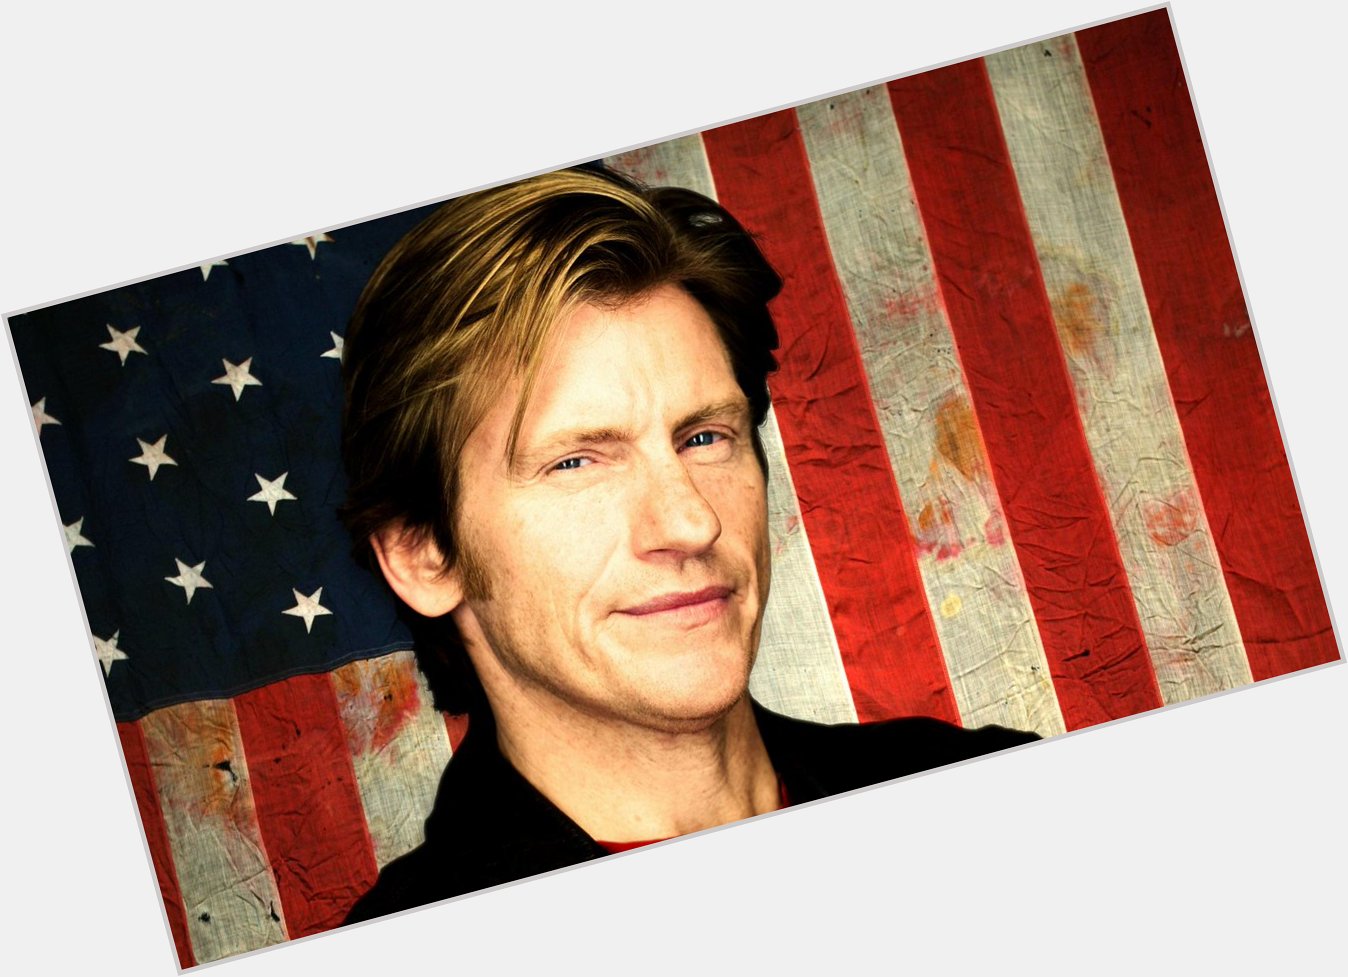 Happy Birthday to Denis Leary, who turns 58 today! 